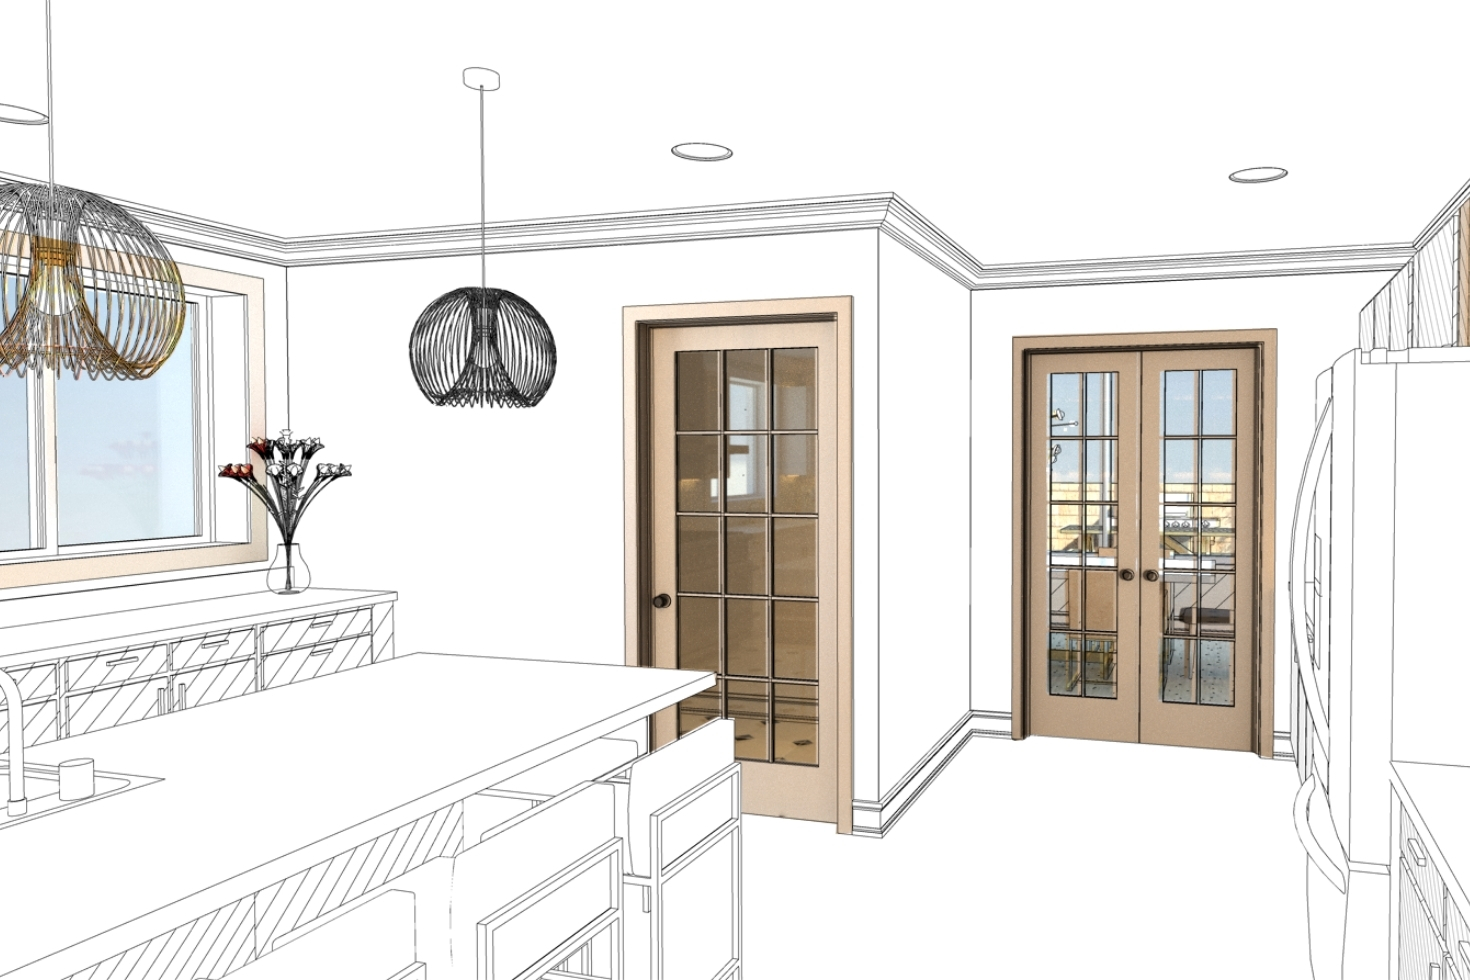 Rendering of an interior designed room